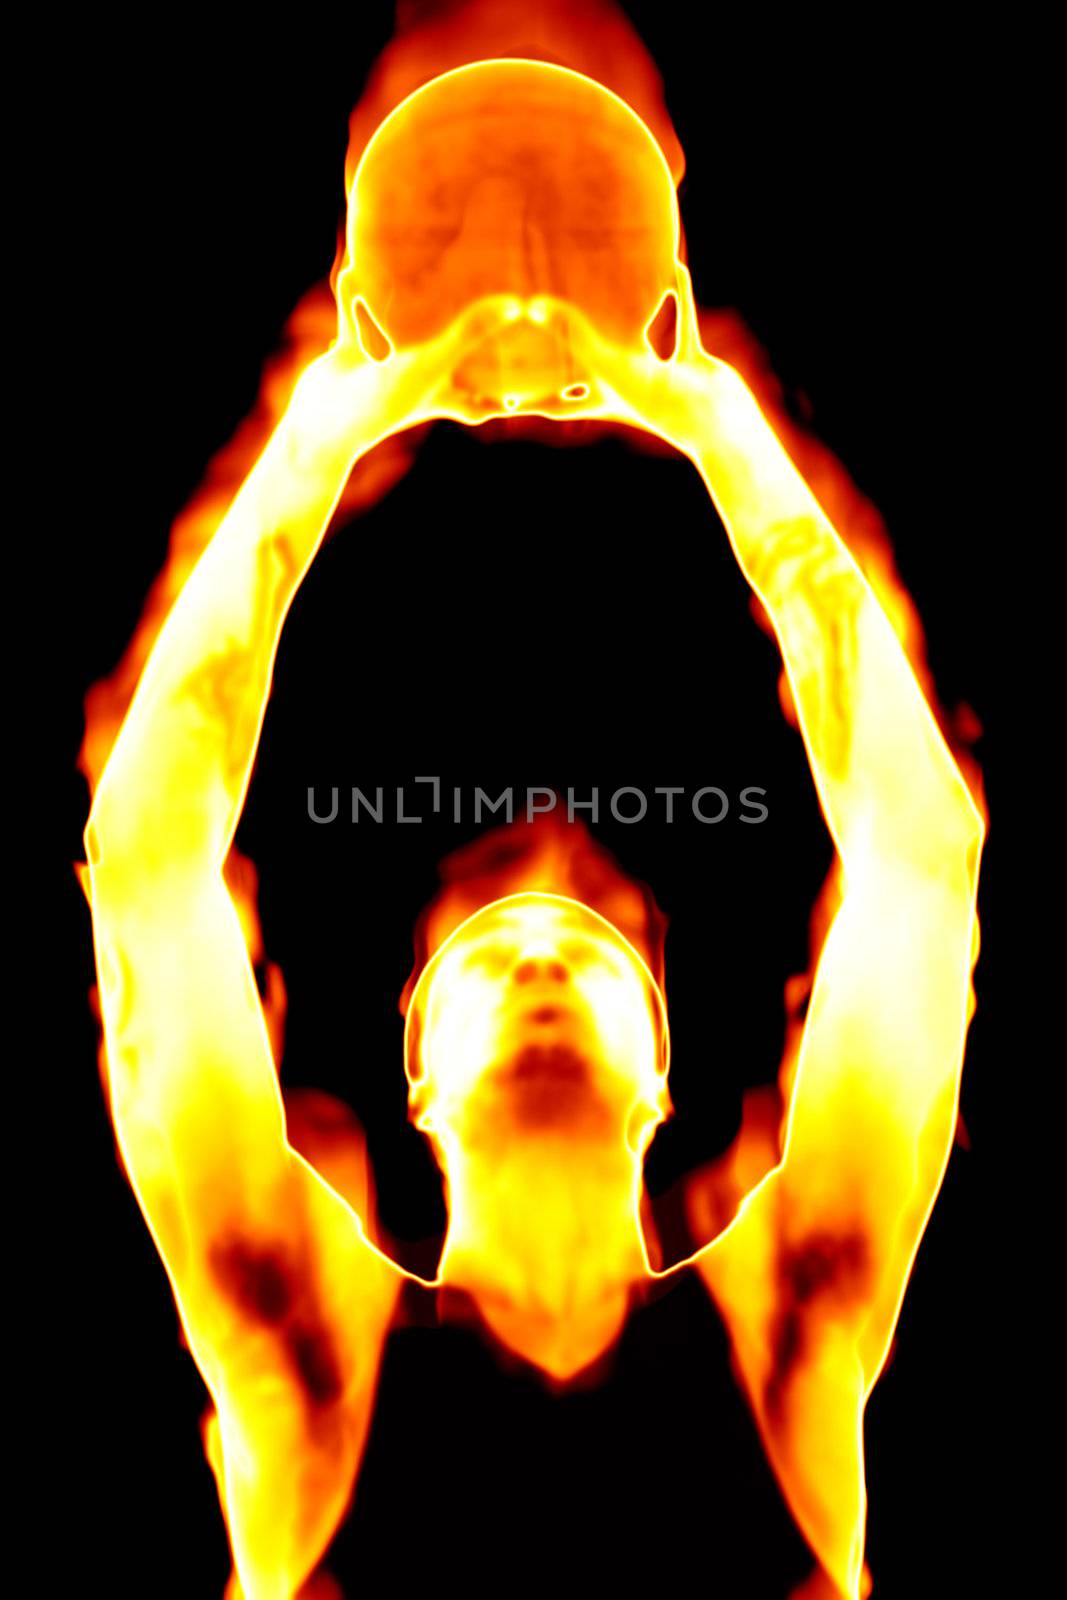 Abstract illustration of a basketball player in flames.